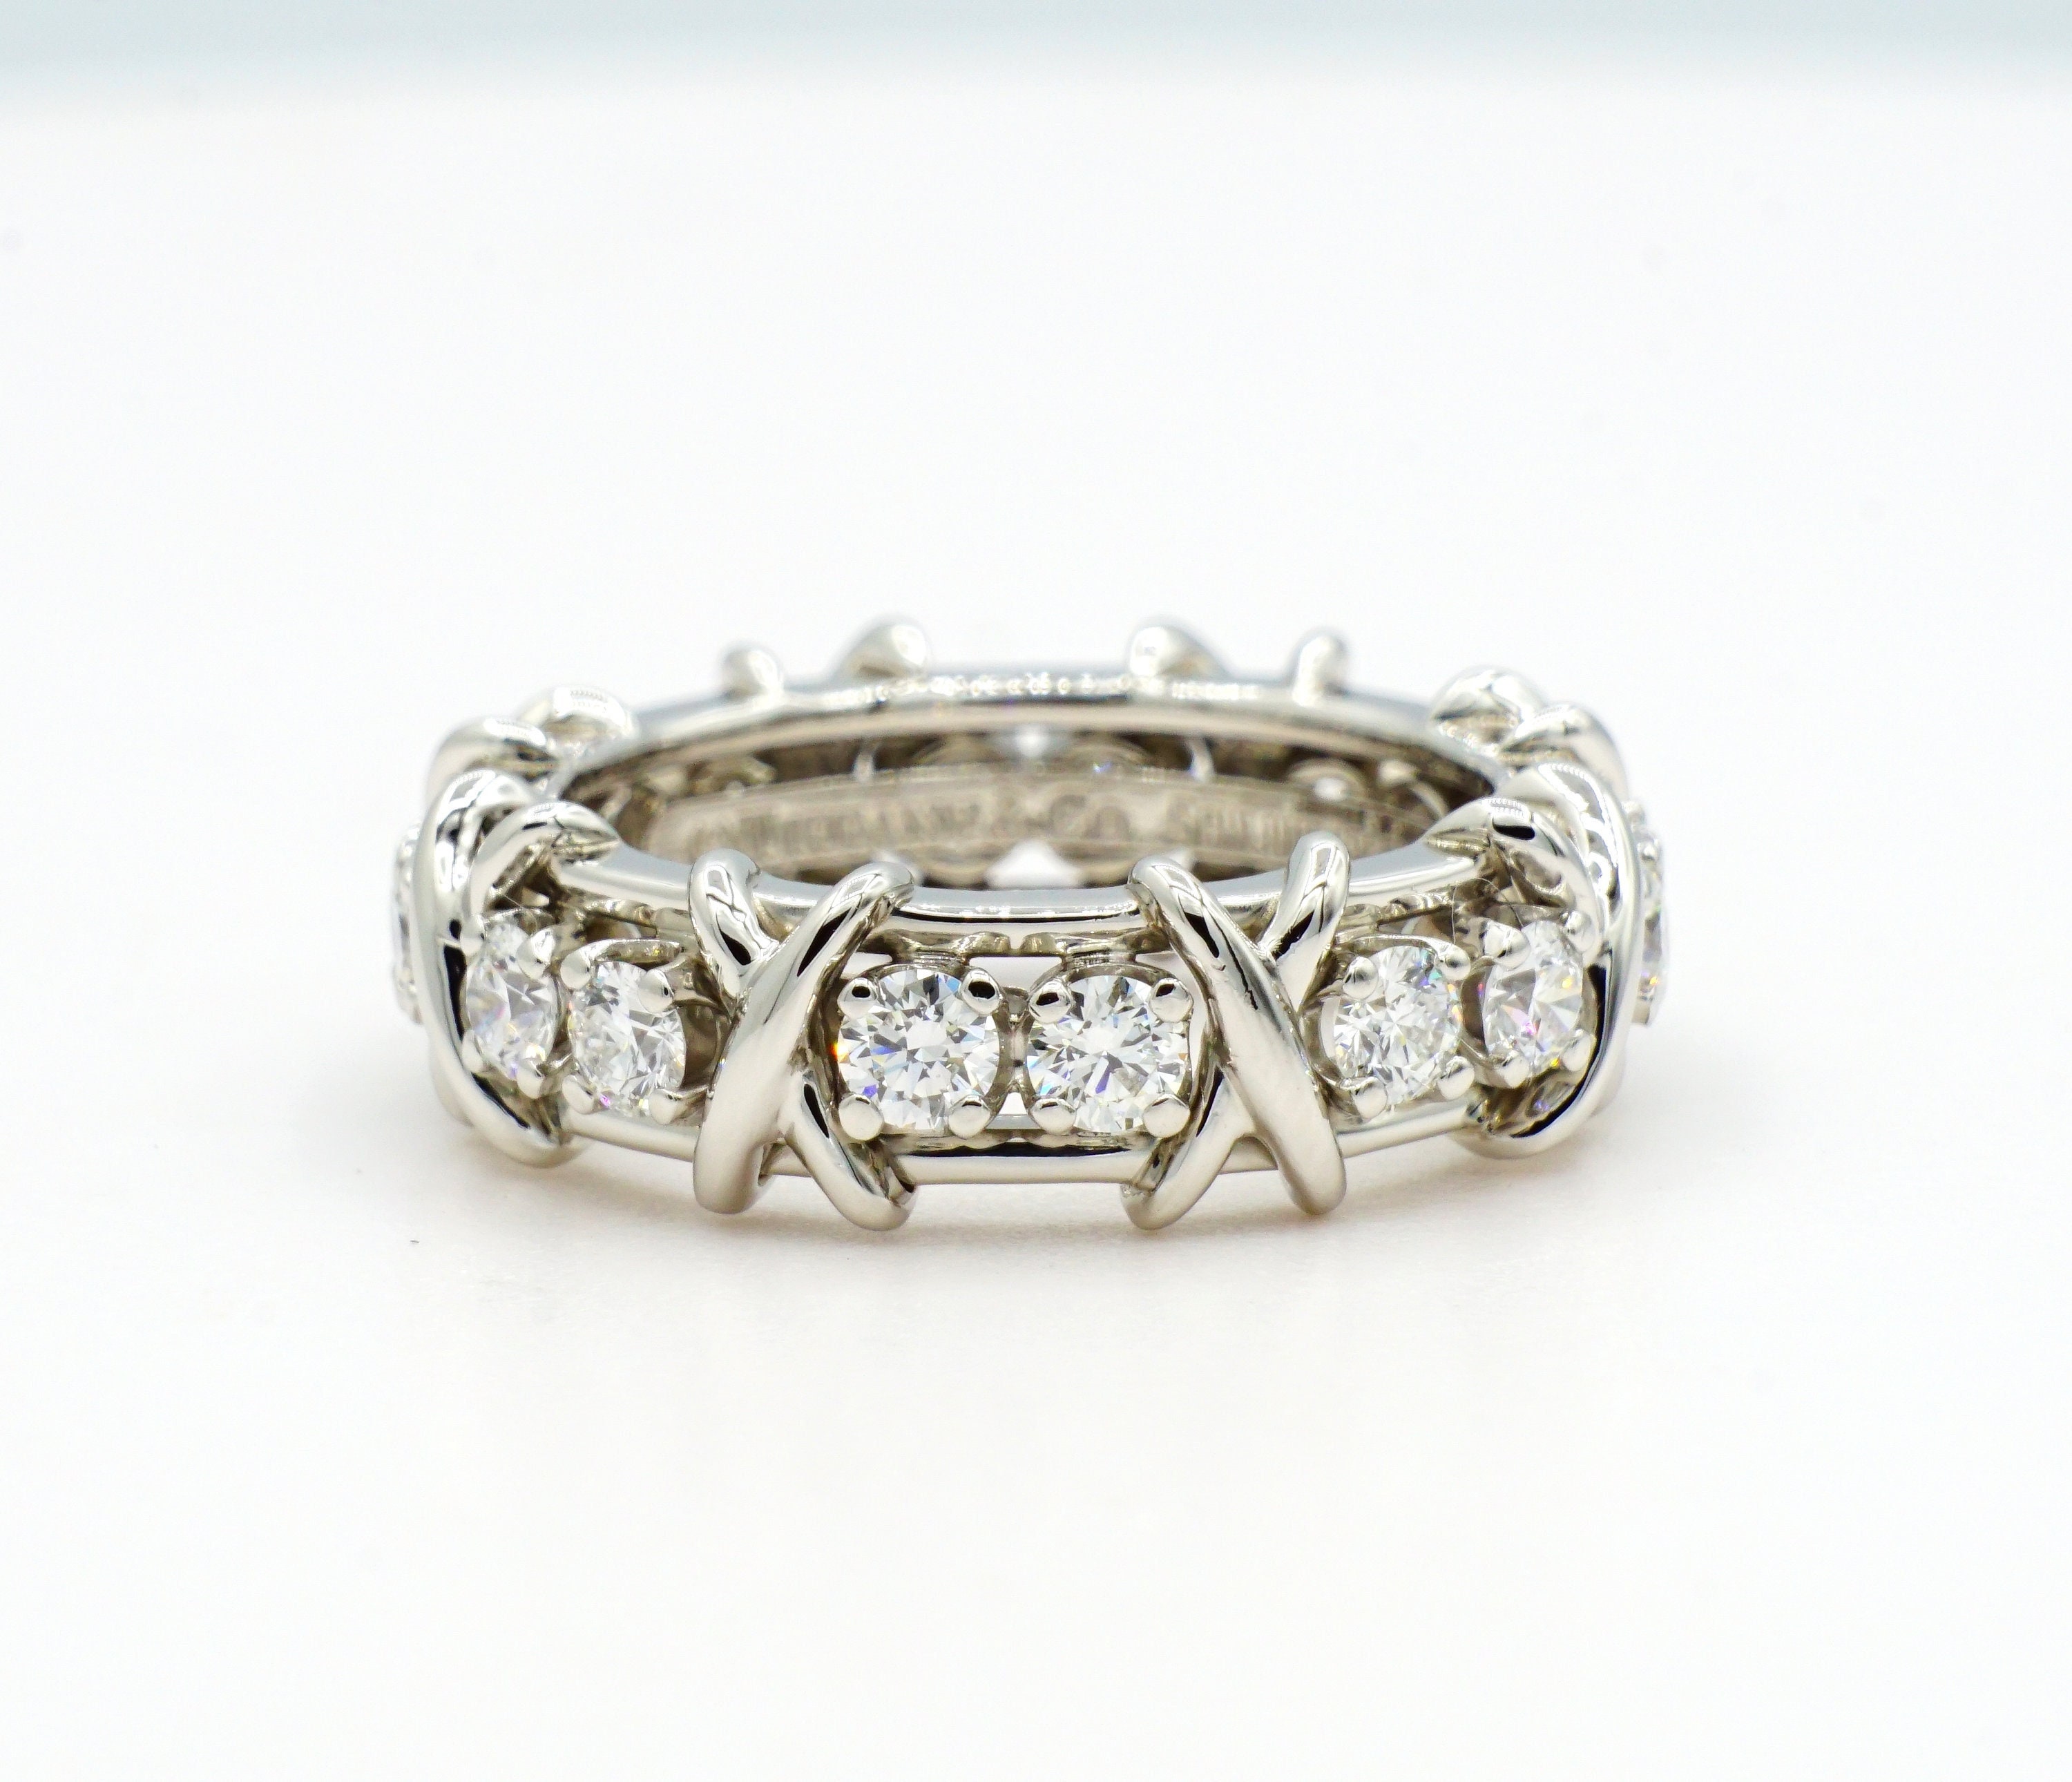 Pre-Loved Jewelry Tiffany Schlumberger Rope 2 Row Diamond Ring $6300 NEW  3037 - Blue Chip Jewelry